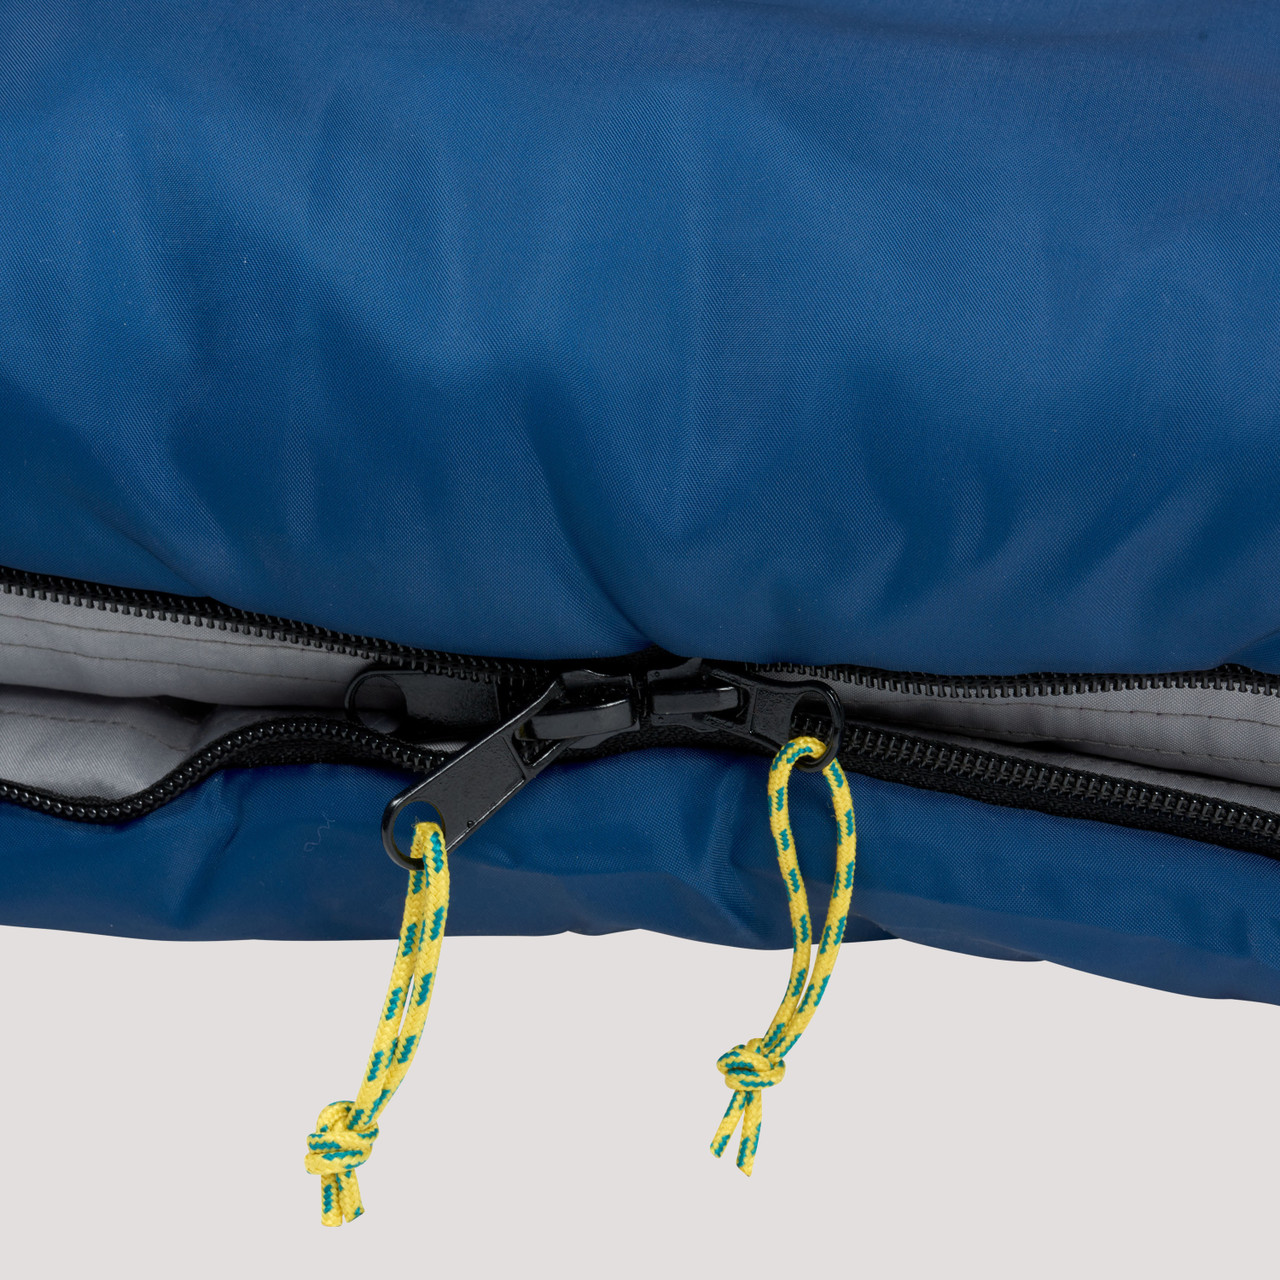 Choosing the Best Winter Camping Sleeping Bag for Cold Weather - Beyond The  Tent